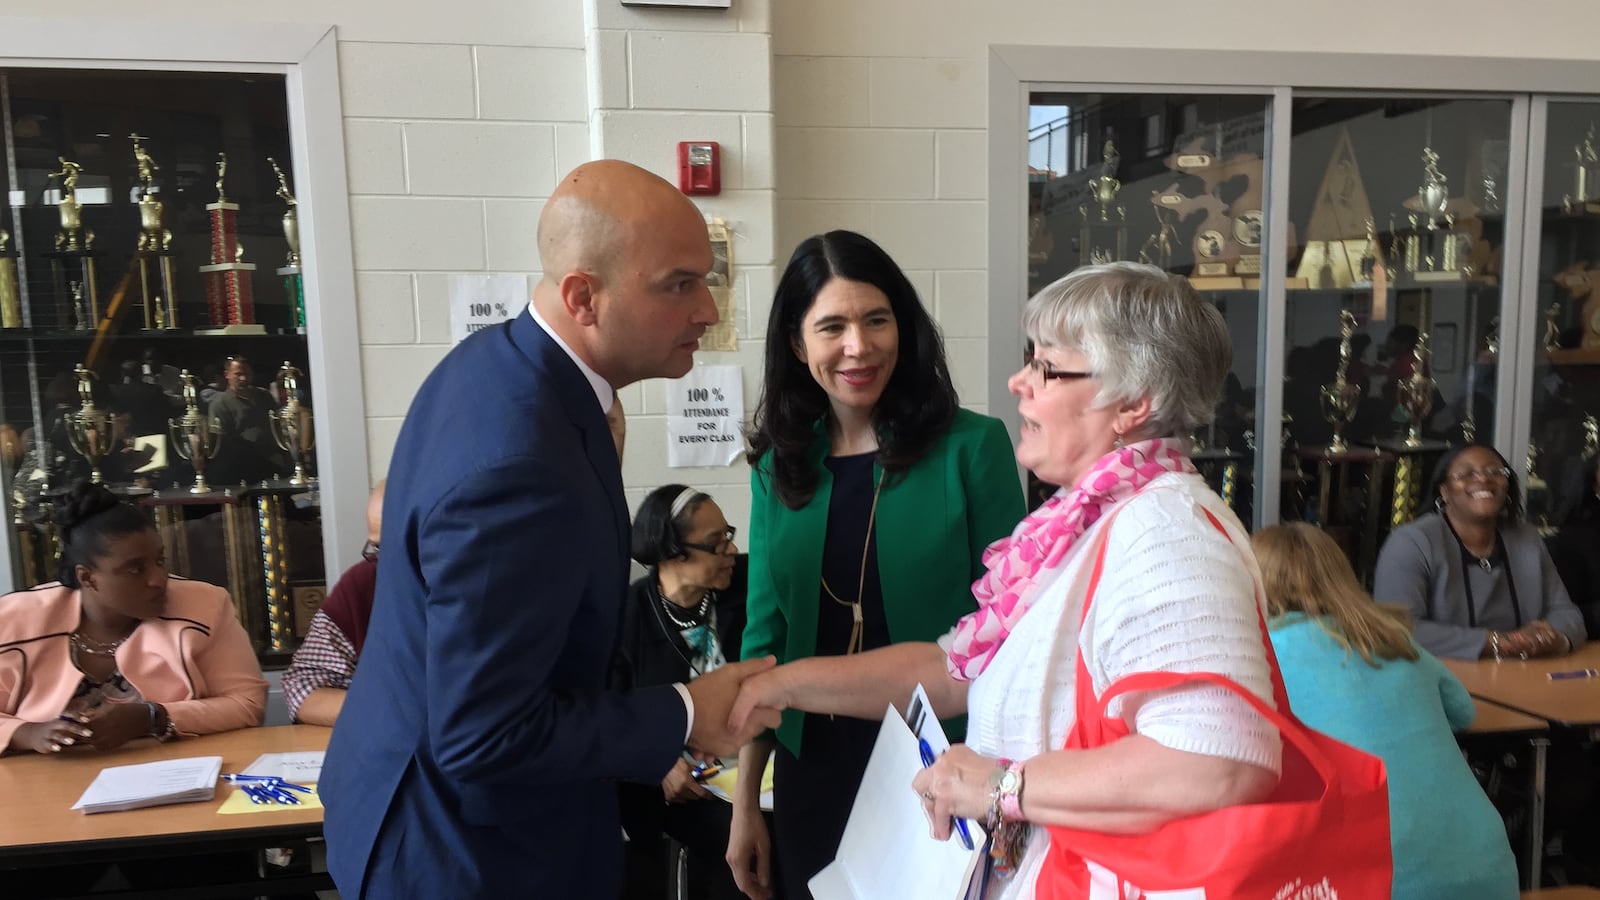 Detroit superintendent Nikolai Vitti named his first deputy, former Interim Superintendent Alycia Meriweather, center. She introduced Vitti in May as he met with principals and applicants at a job fair.